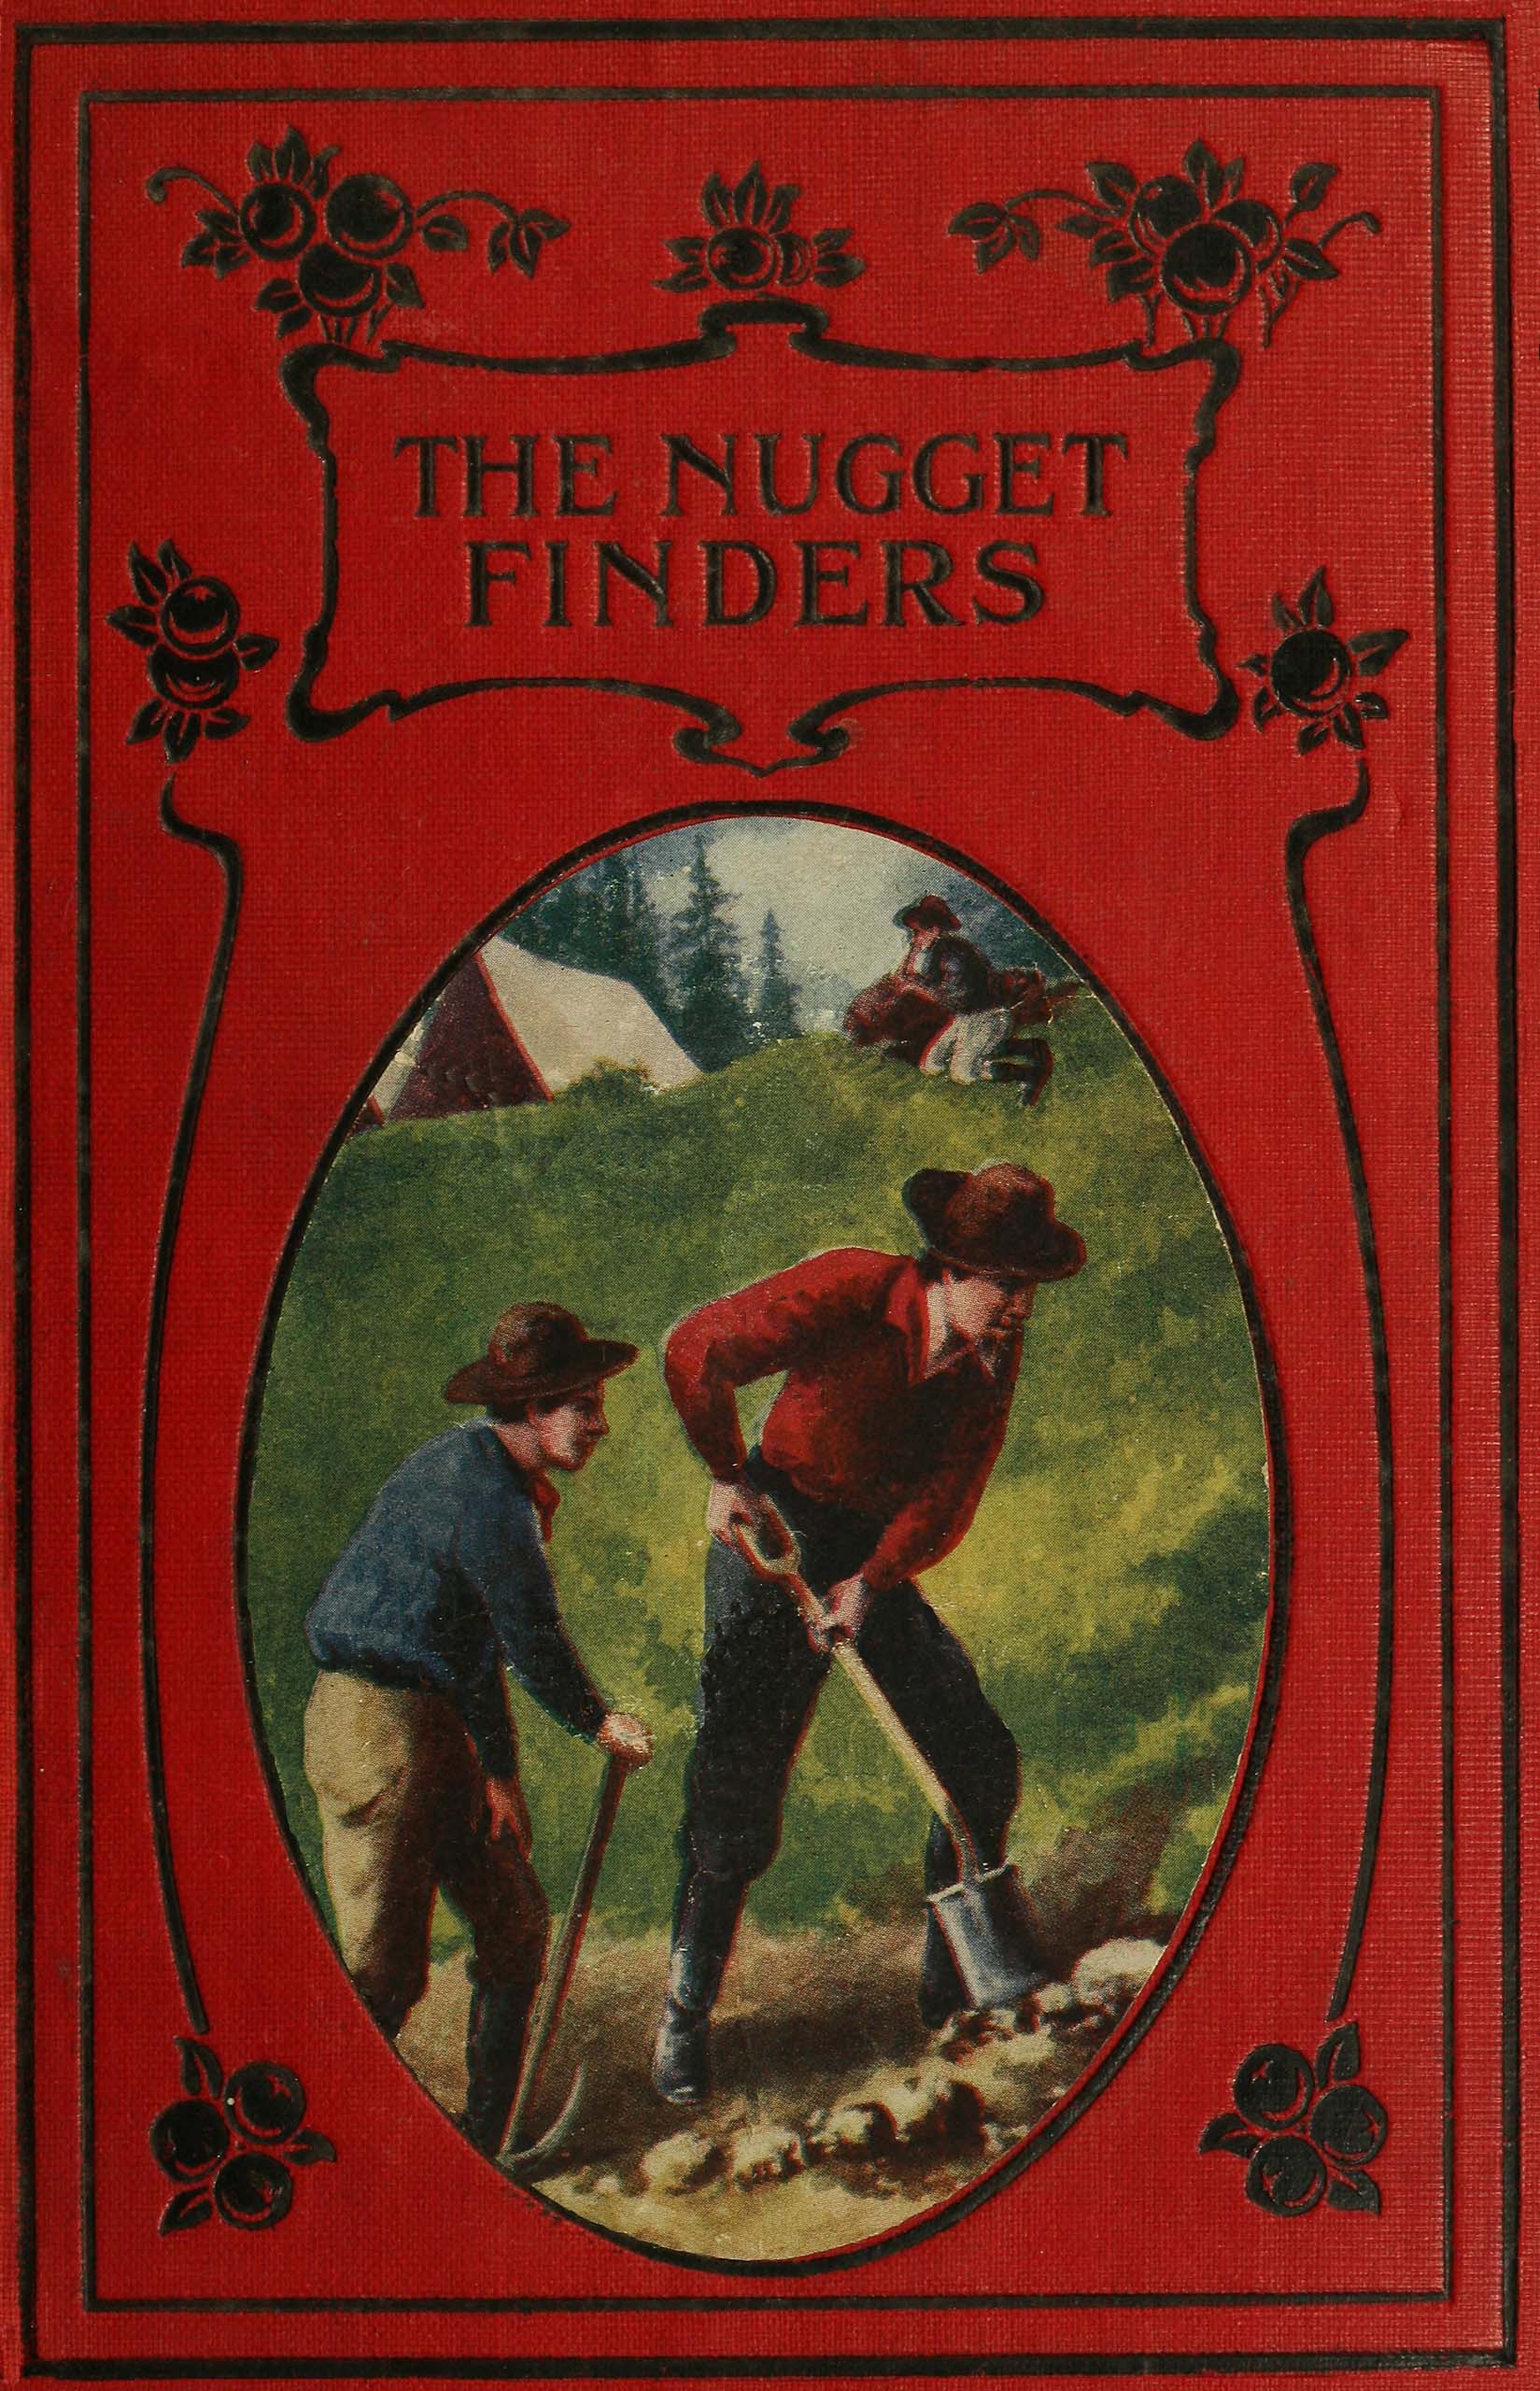 The nugget finders